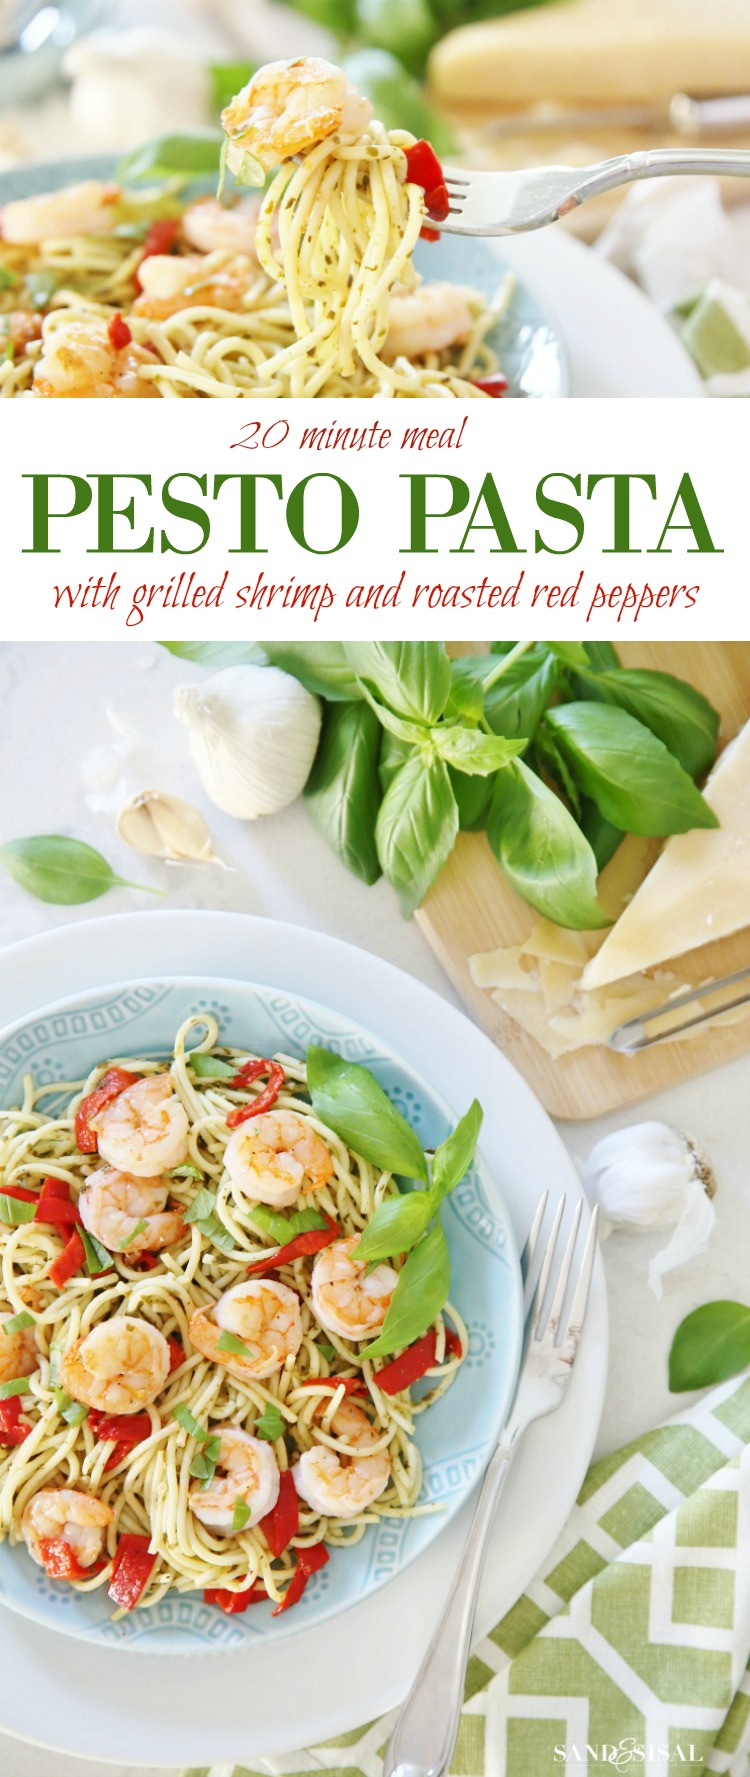 Pesto Pasta with Grilled Shrimp and Roasted Red Peppers - a 20 minute meal